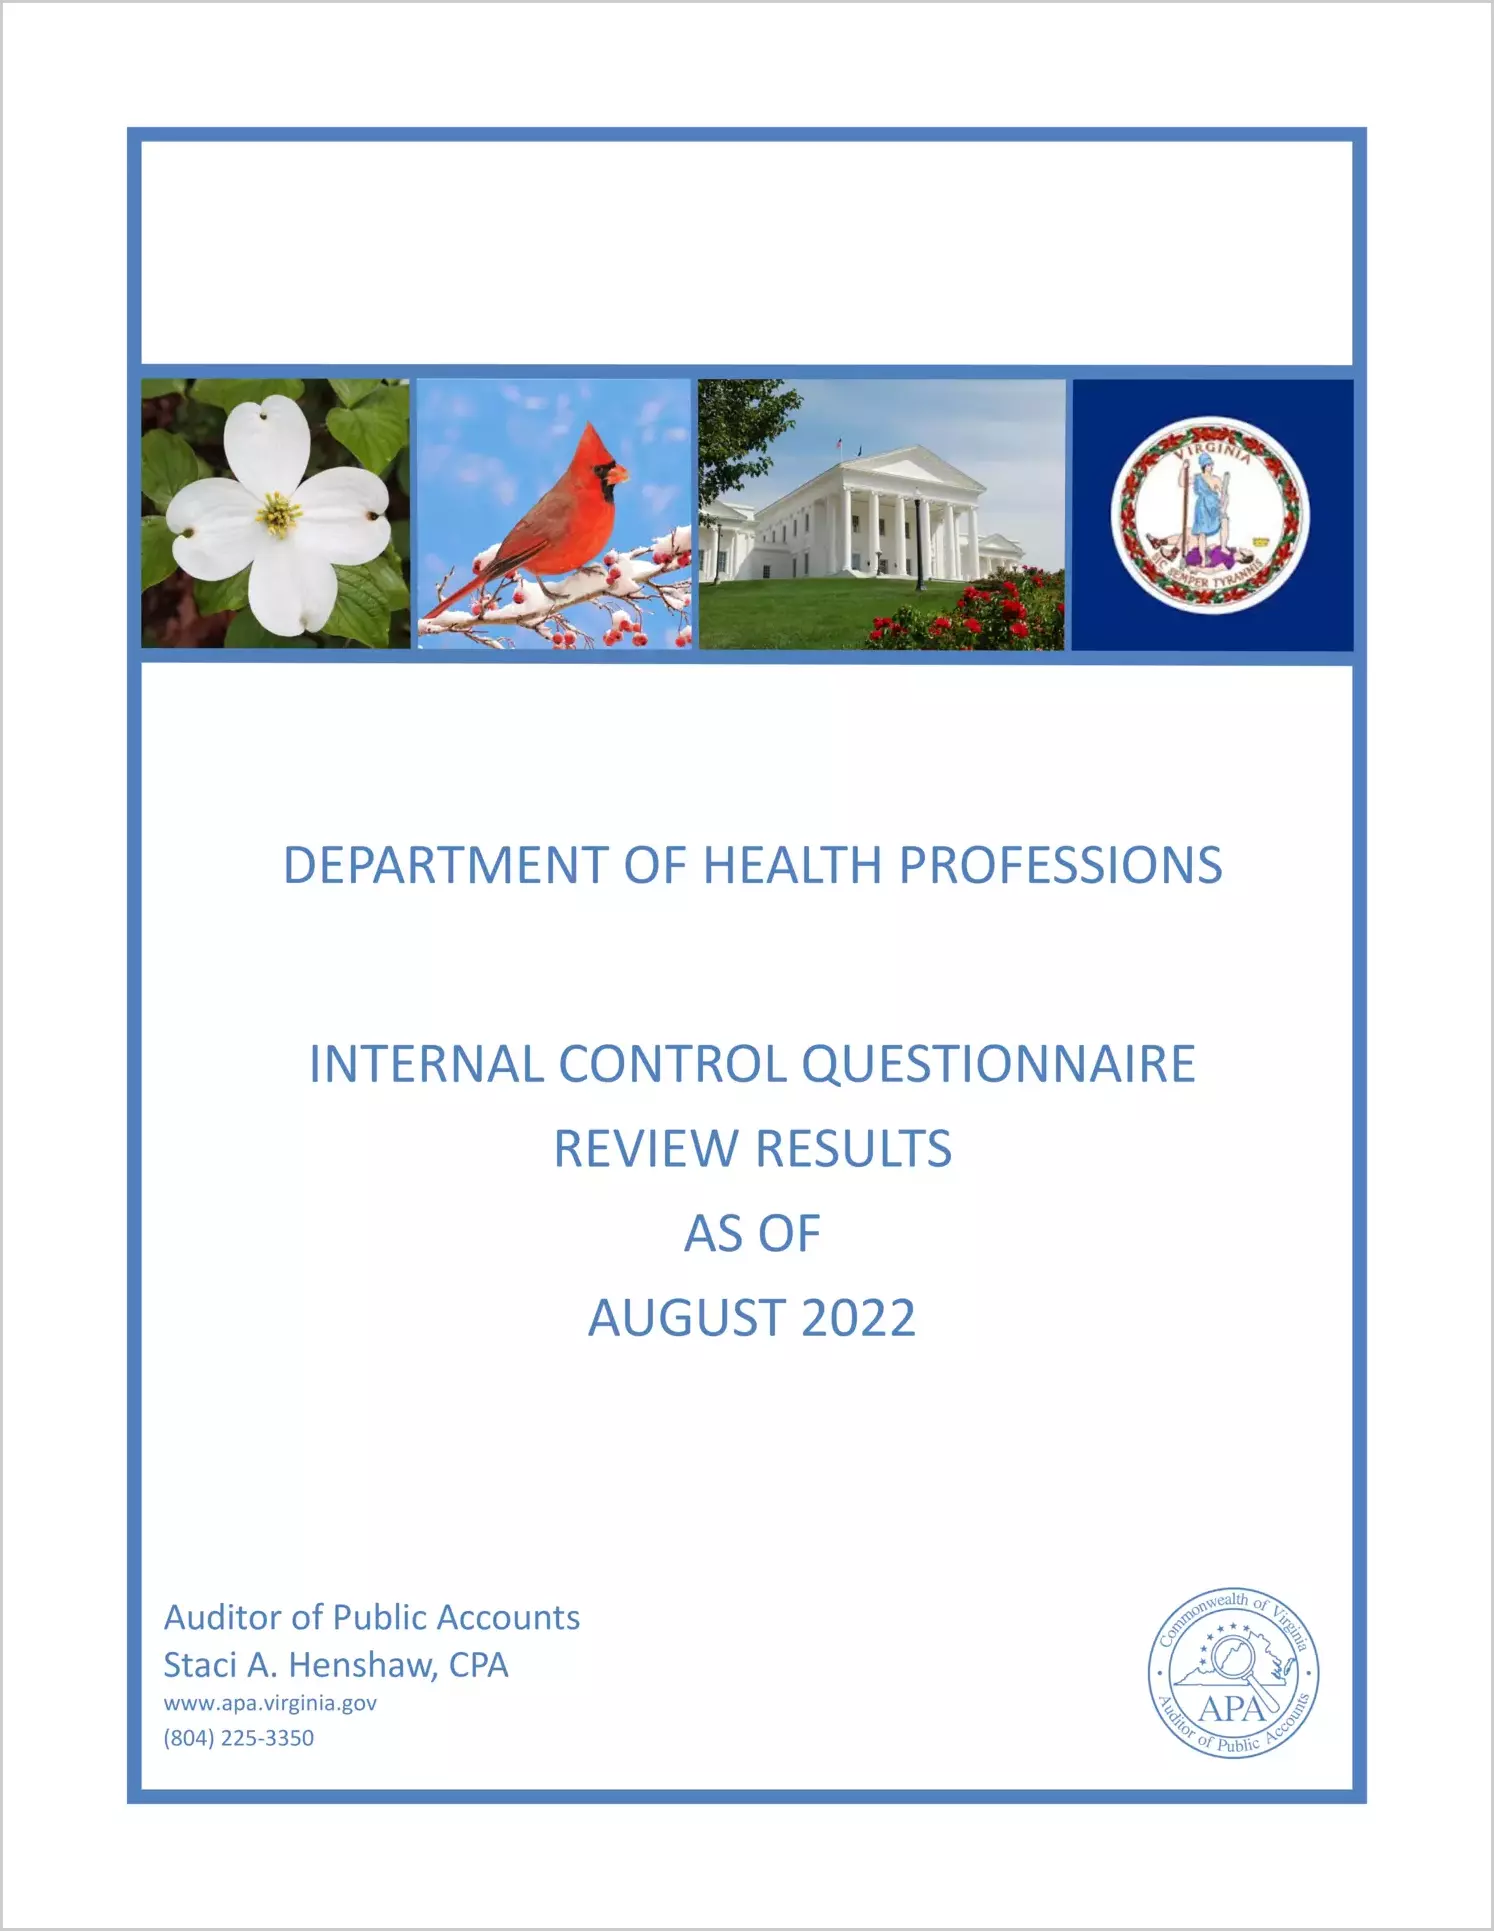 Department of Health Professions Internal Control Questionnaire Review Results as of August 2022